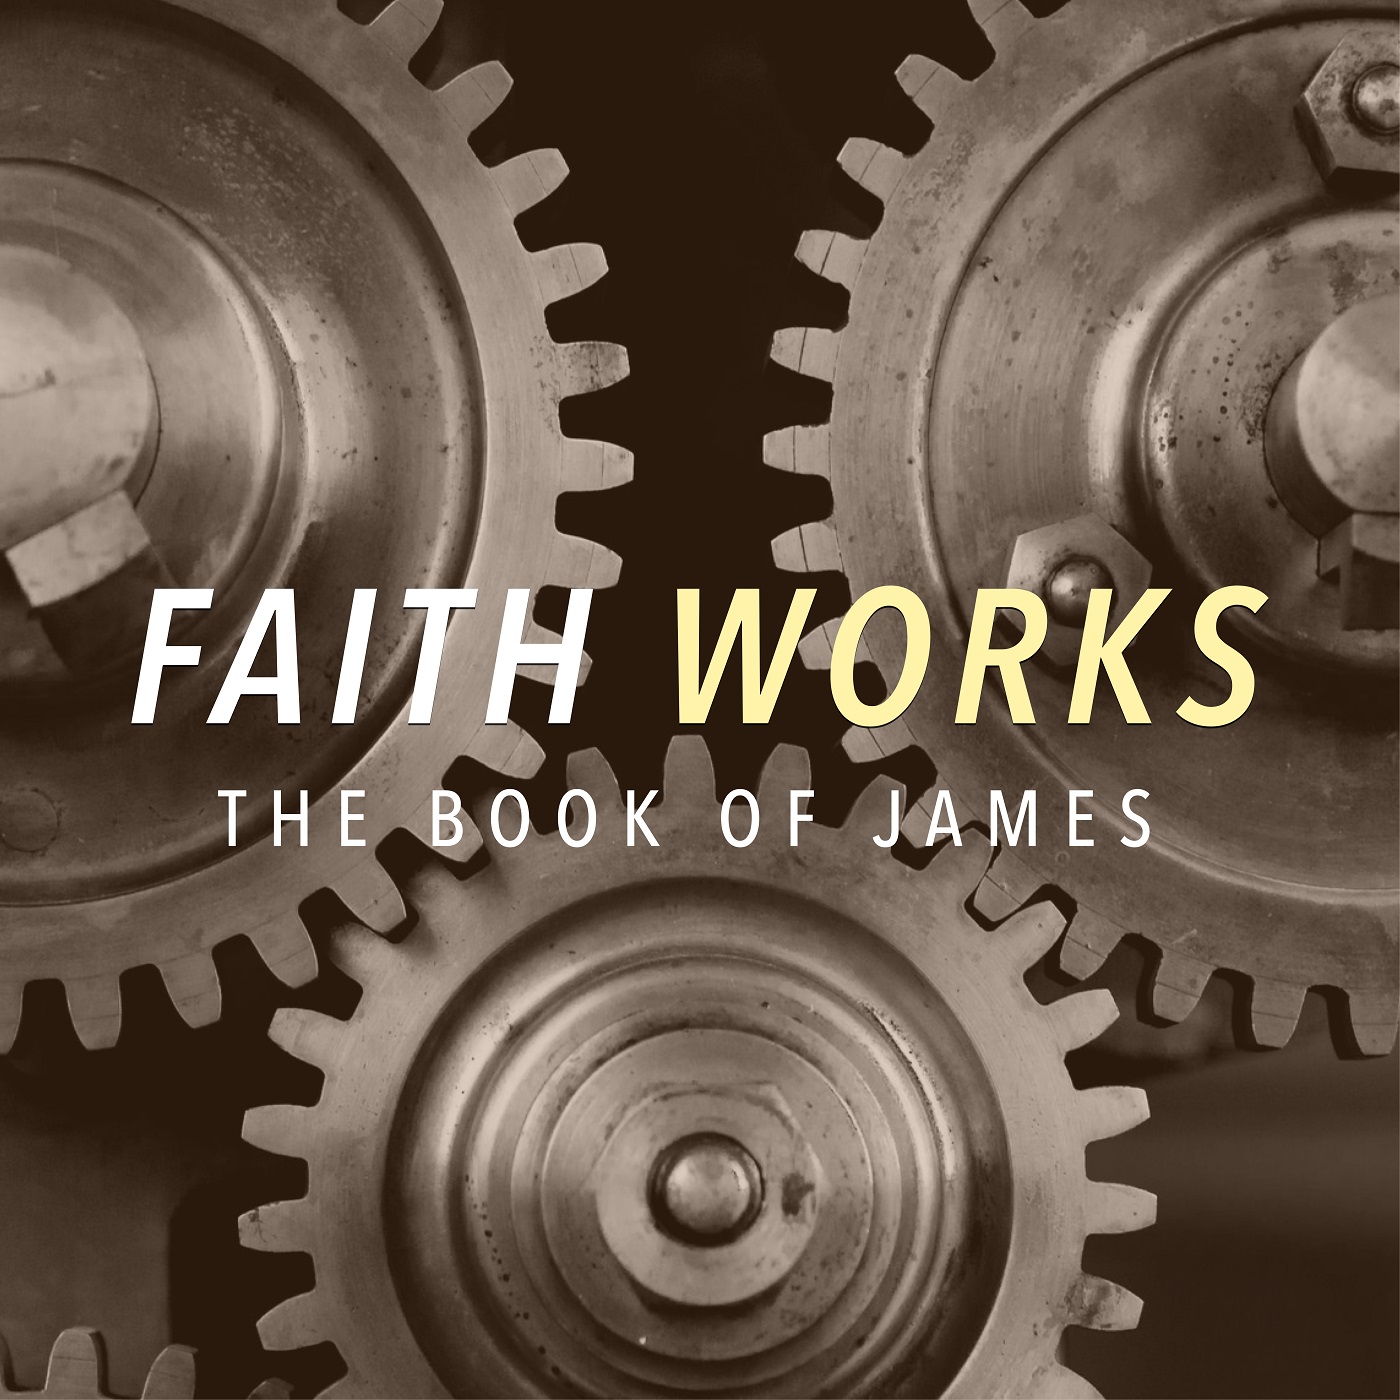 Faith Works: Poor Rich People (July 16, 2017)